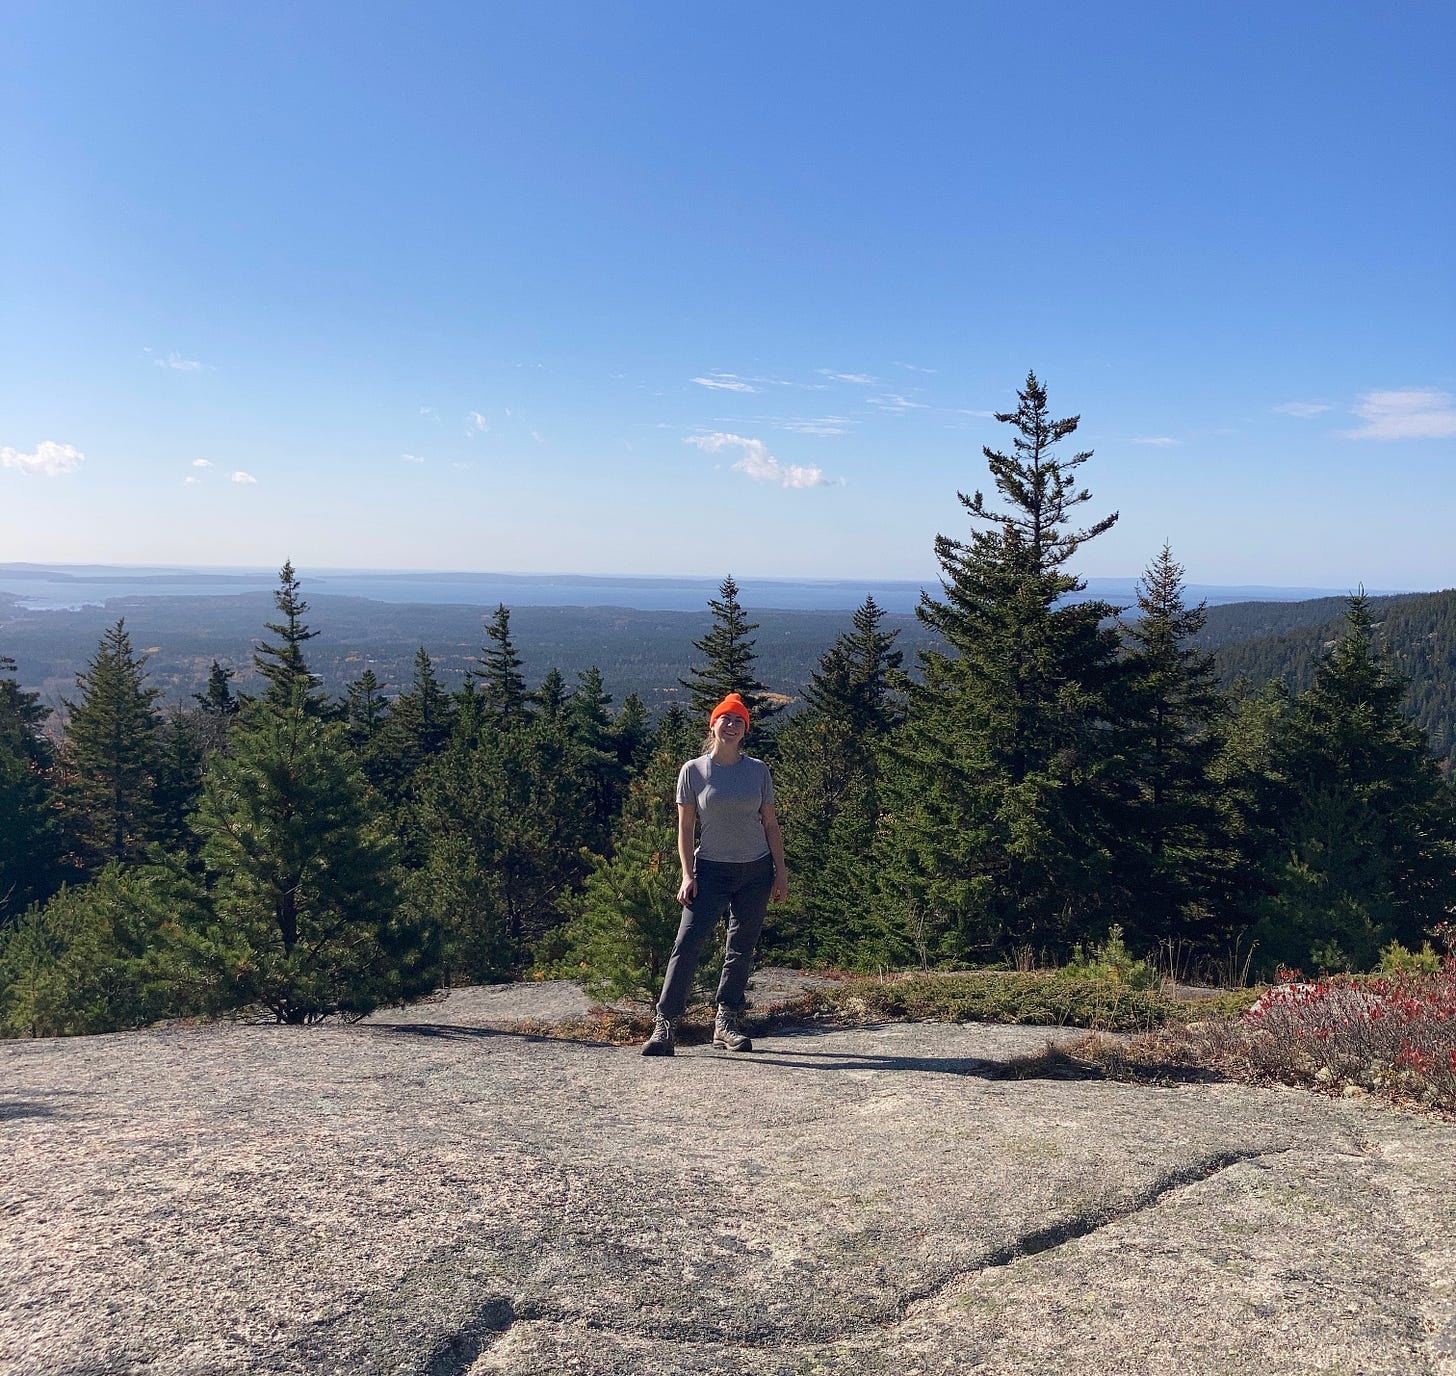 Kate, wearing a blaze orange knit cap and hiking clothes, stands on a rocky mountain smiling at the camera. Behind Kate are evergreens, and behind the evergreens is a view to the horizon of islands and water.